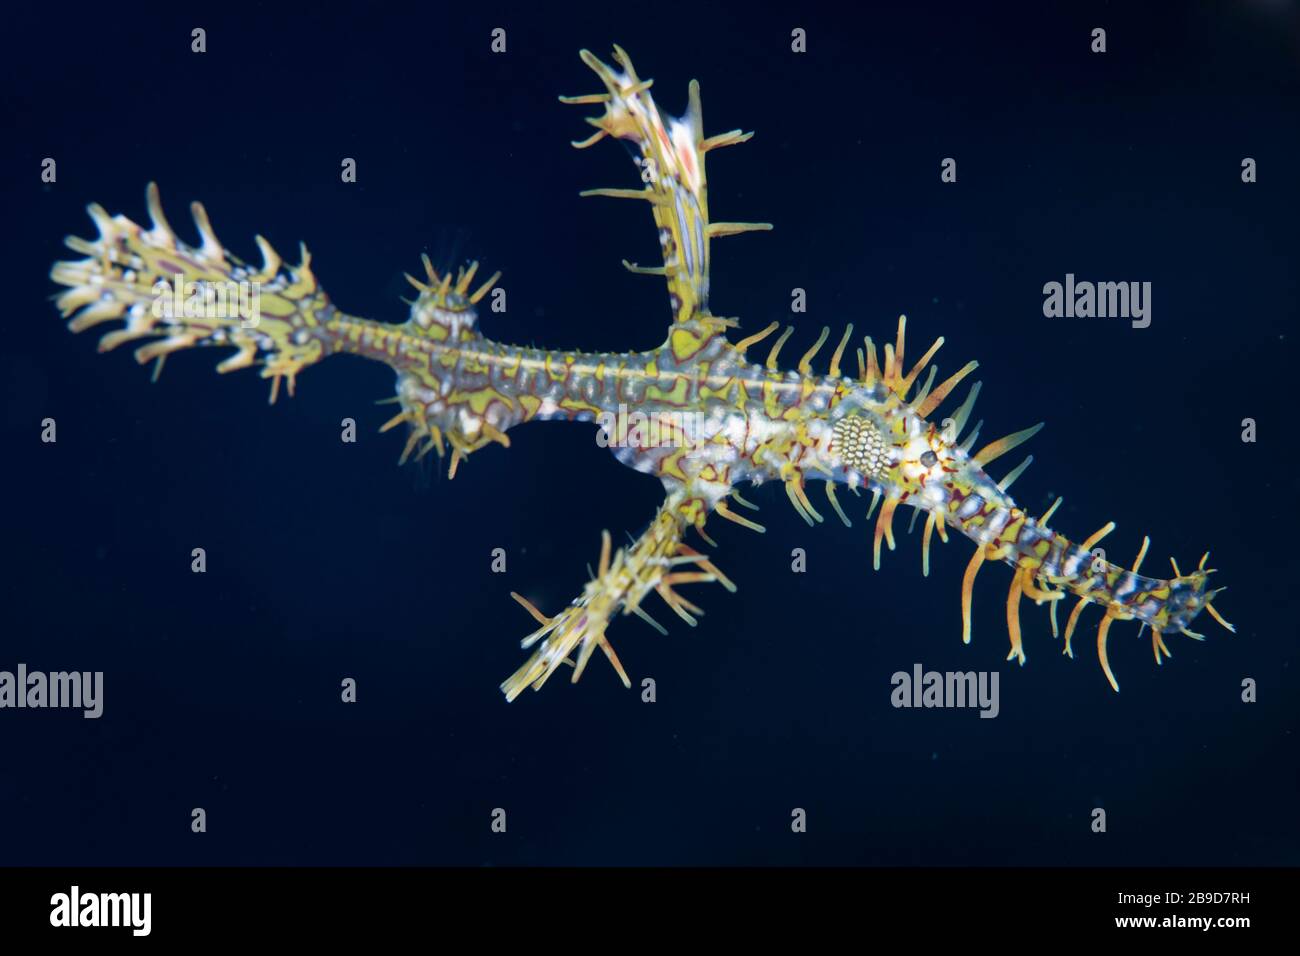 A colorful ornate ghost pipefish, Solenostomus paradoxus. Stock Photo